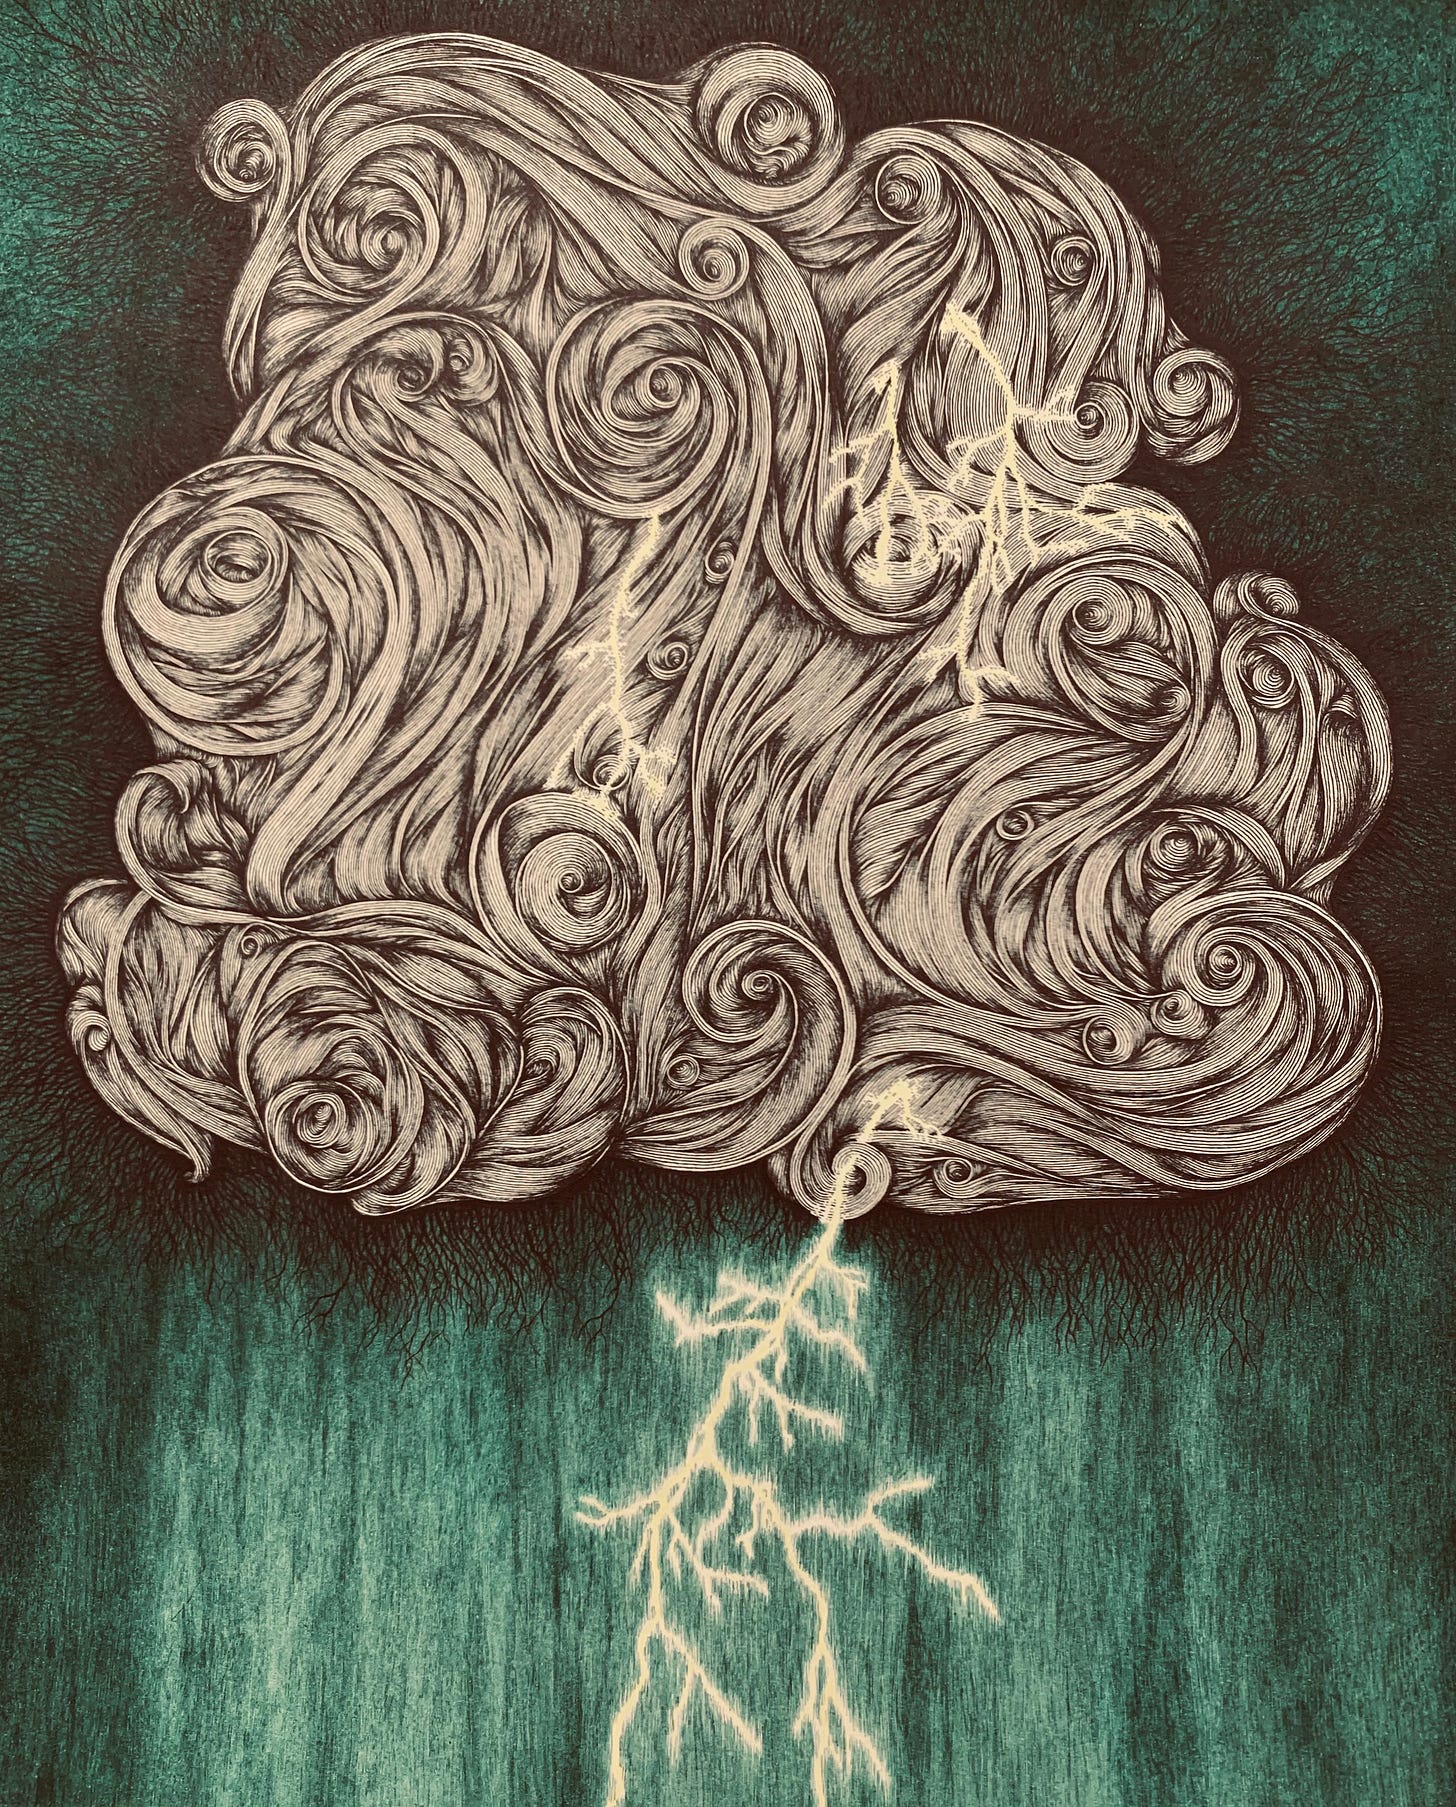 Ink drawing of a thundercloud with stylized curls that make up the cloud and a dark green background.